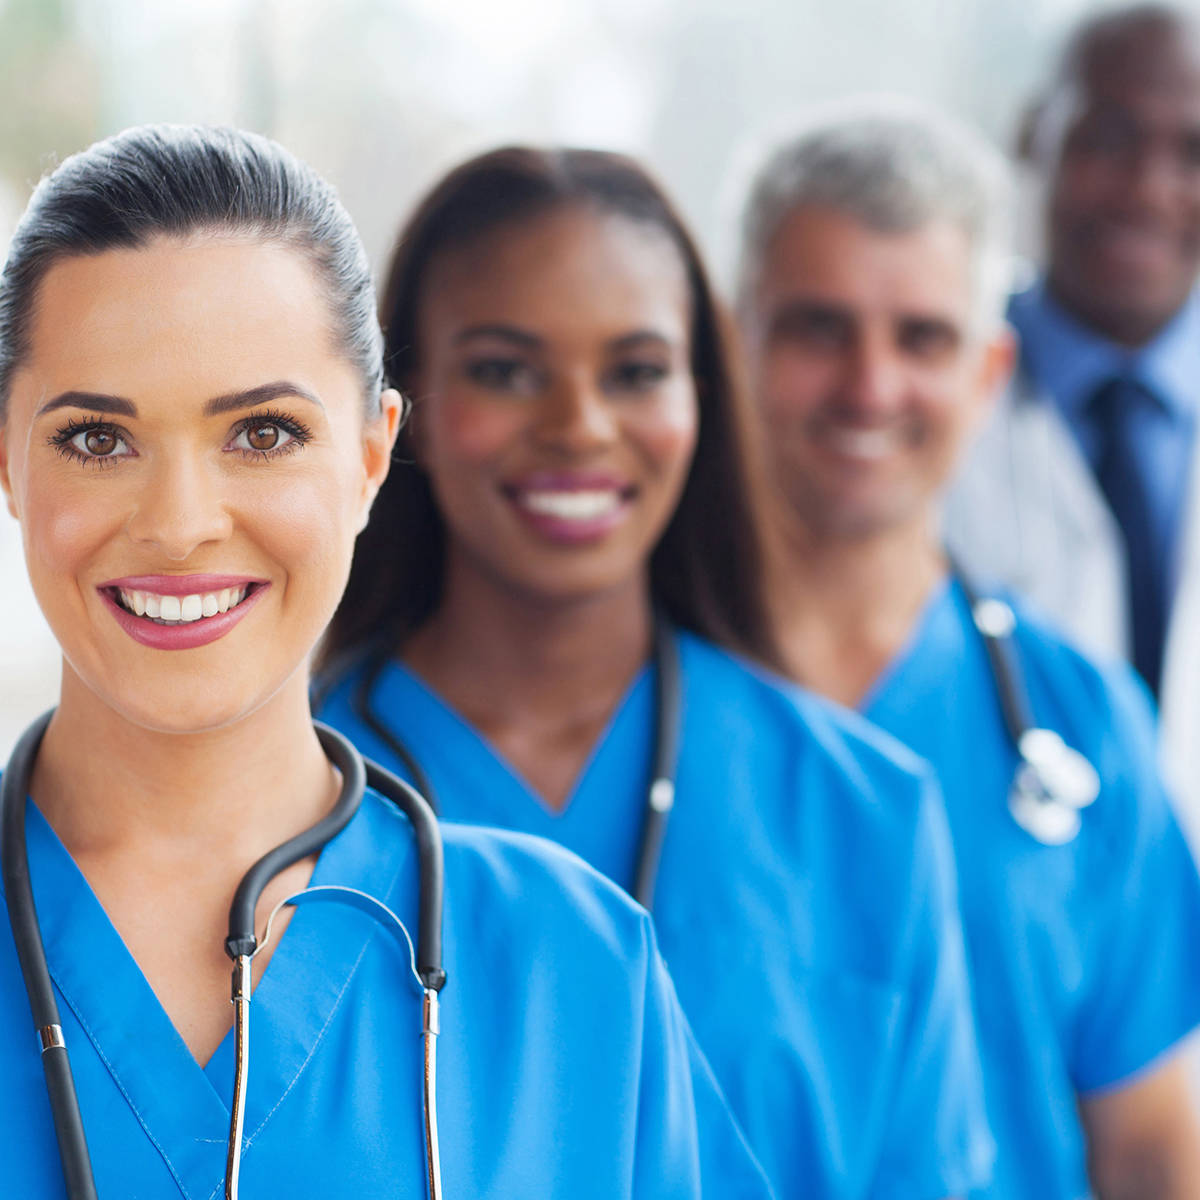 Line of smiling healthcare professionals